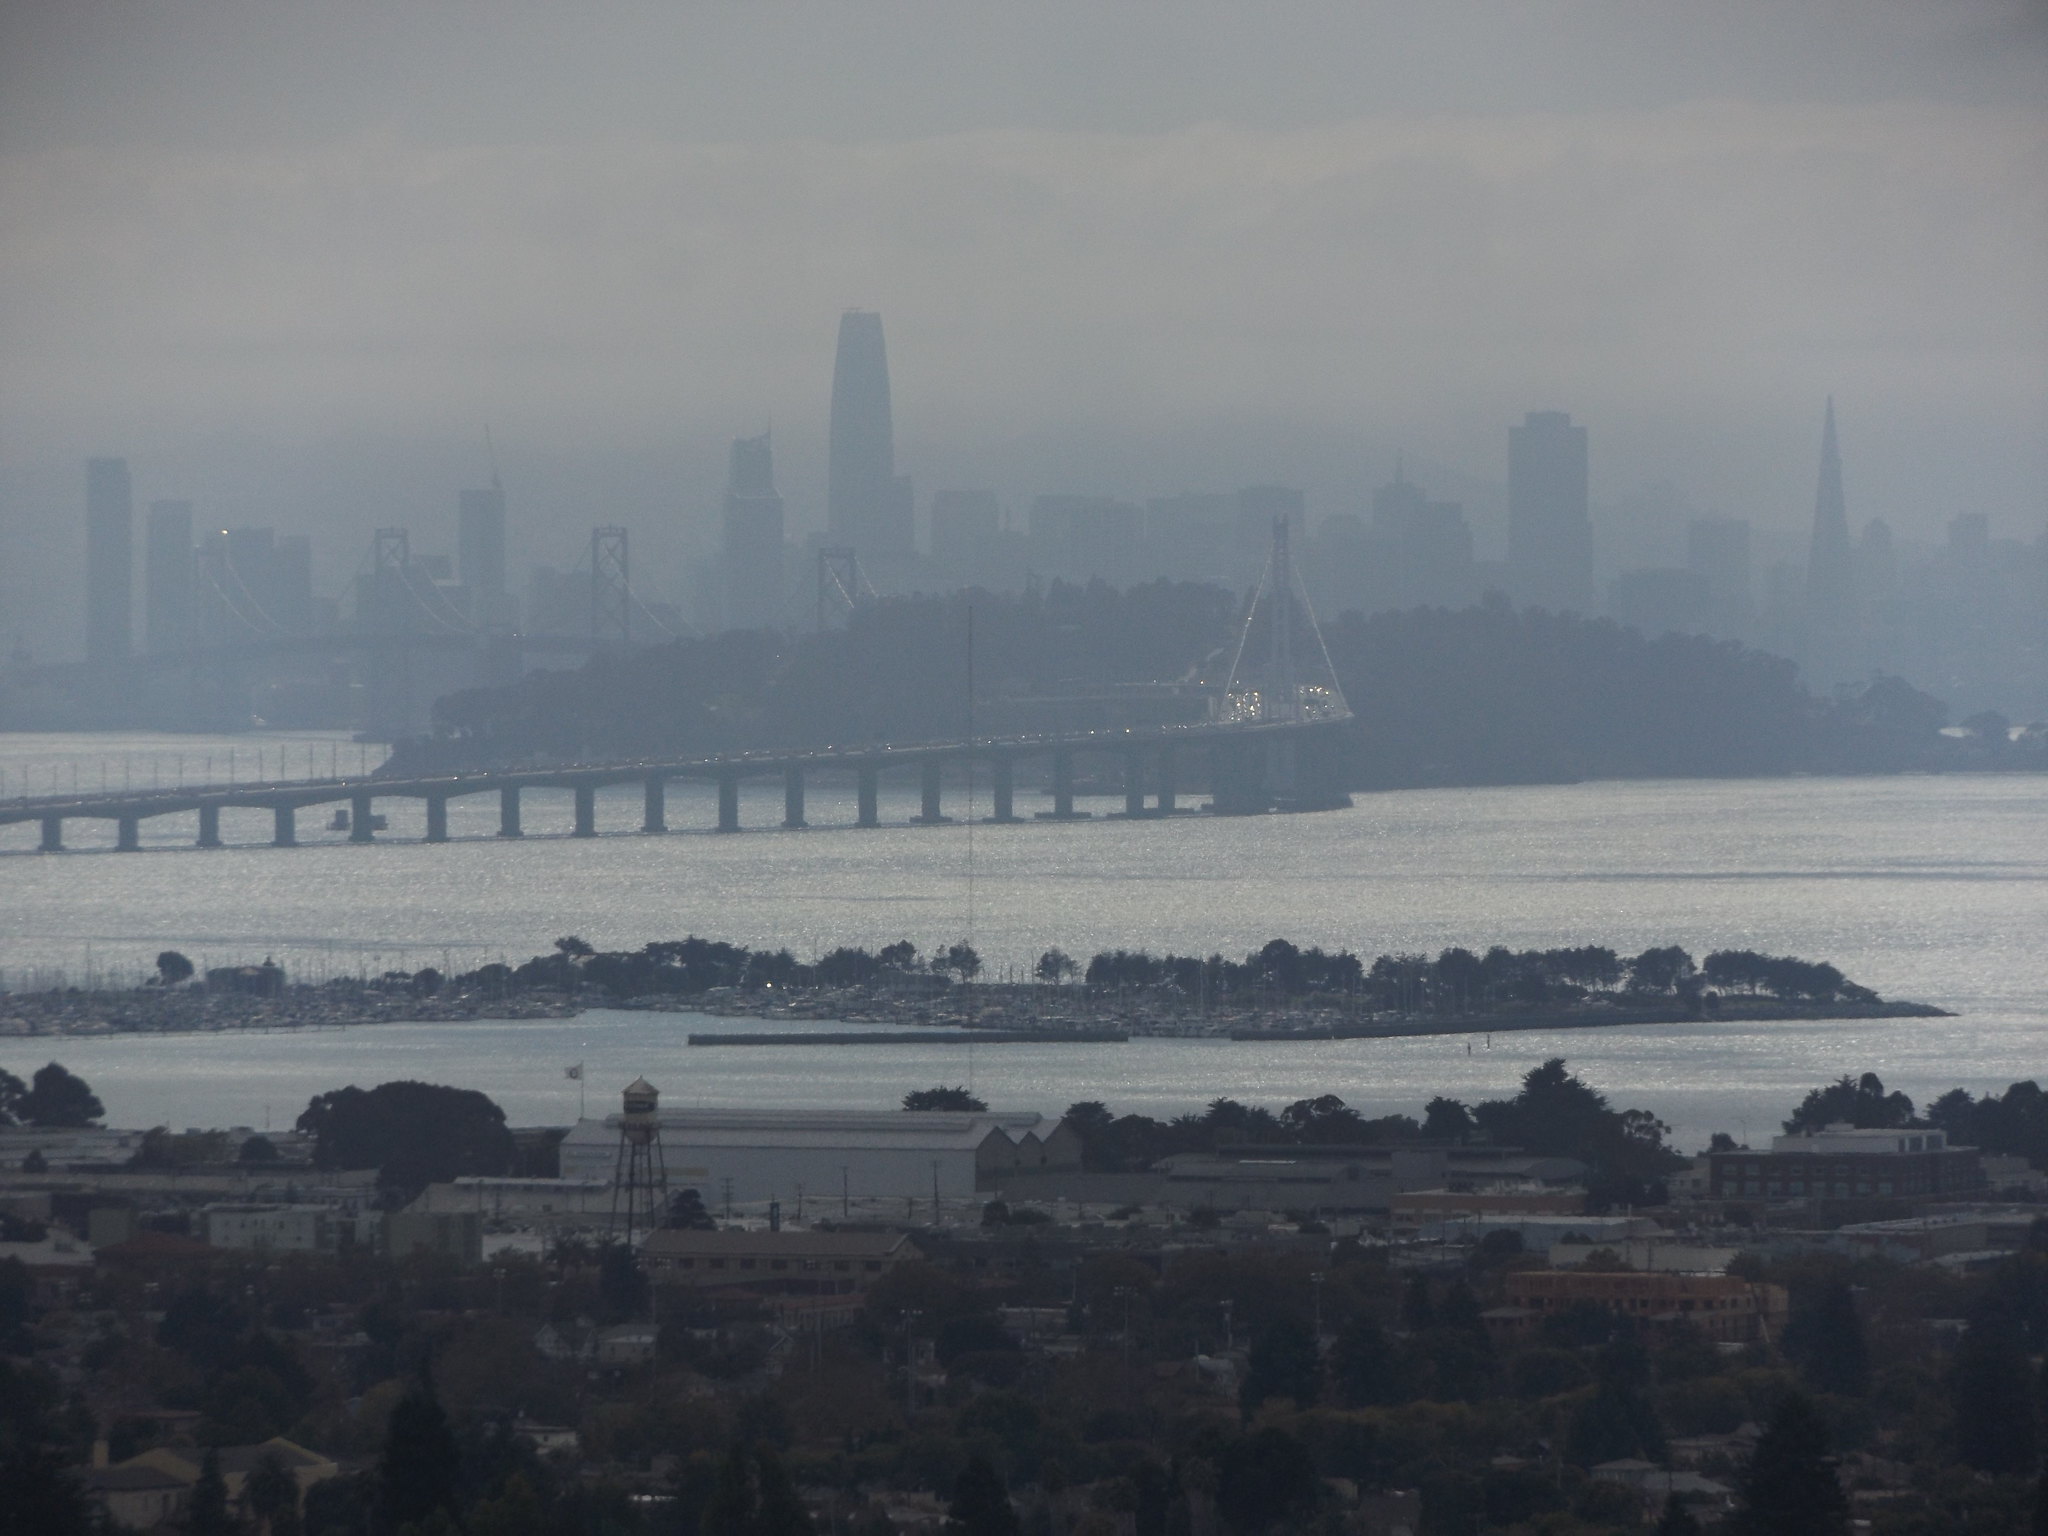 San Francisco on a Gloomy Day from Sather Tower, UC Berkeley, California, USA, 5 September 2018